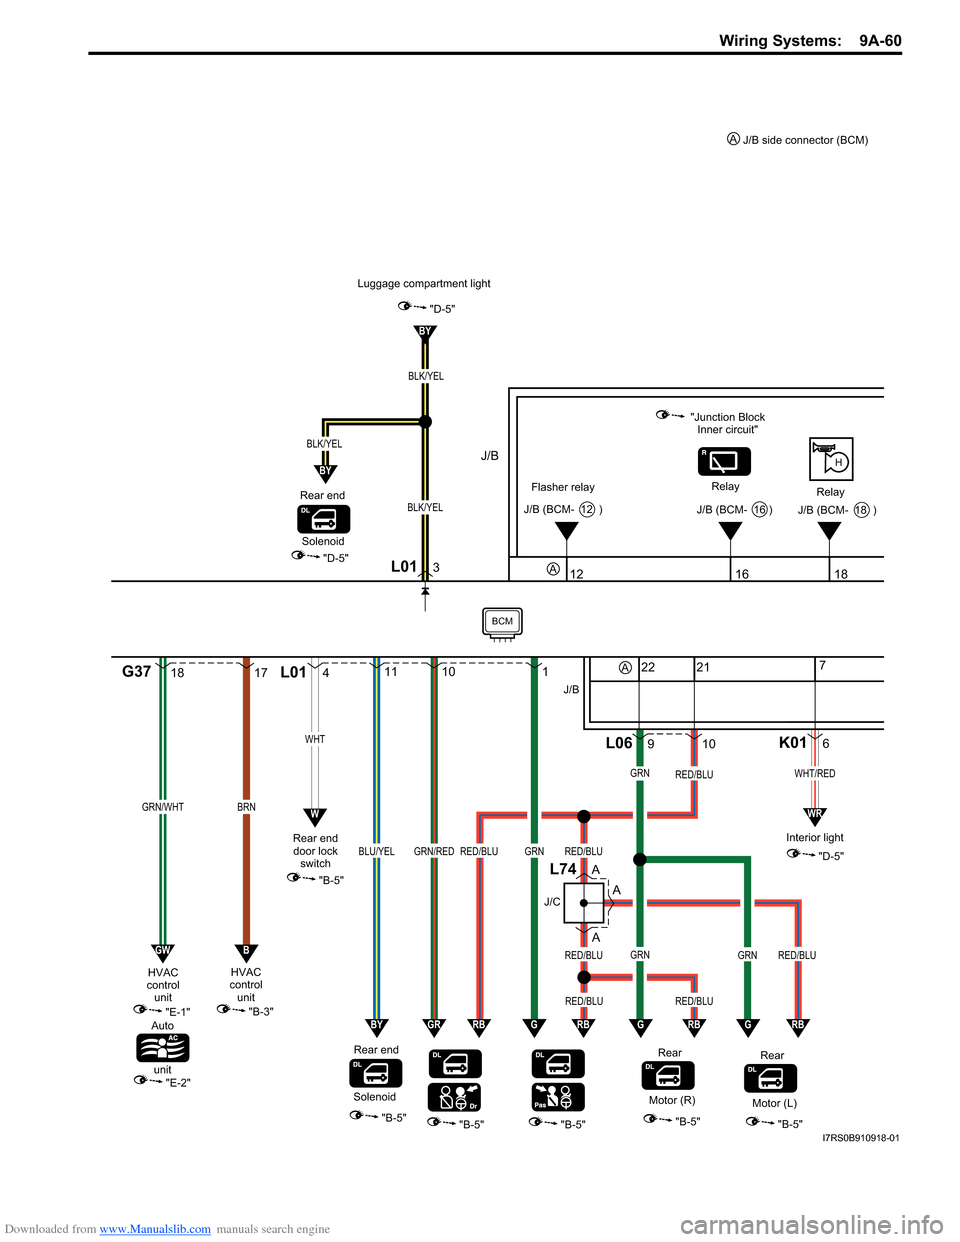 SUZUKI SWIFT 2008 2.G Service Workshop Manual Downloaded from www.Manualslib.com manuals search engine Wiring Systems:  9A-60
1817
GRN/WHTBRN
"E-1"
"E-2"
HVAC
control unit
Auto
unit
G37
Flasher relay Relay
Relay
H
12
"Junction Block
Inner circuit